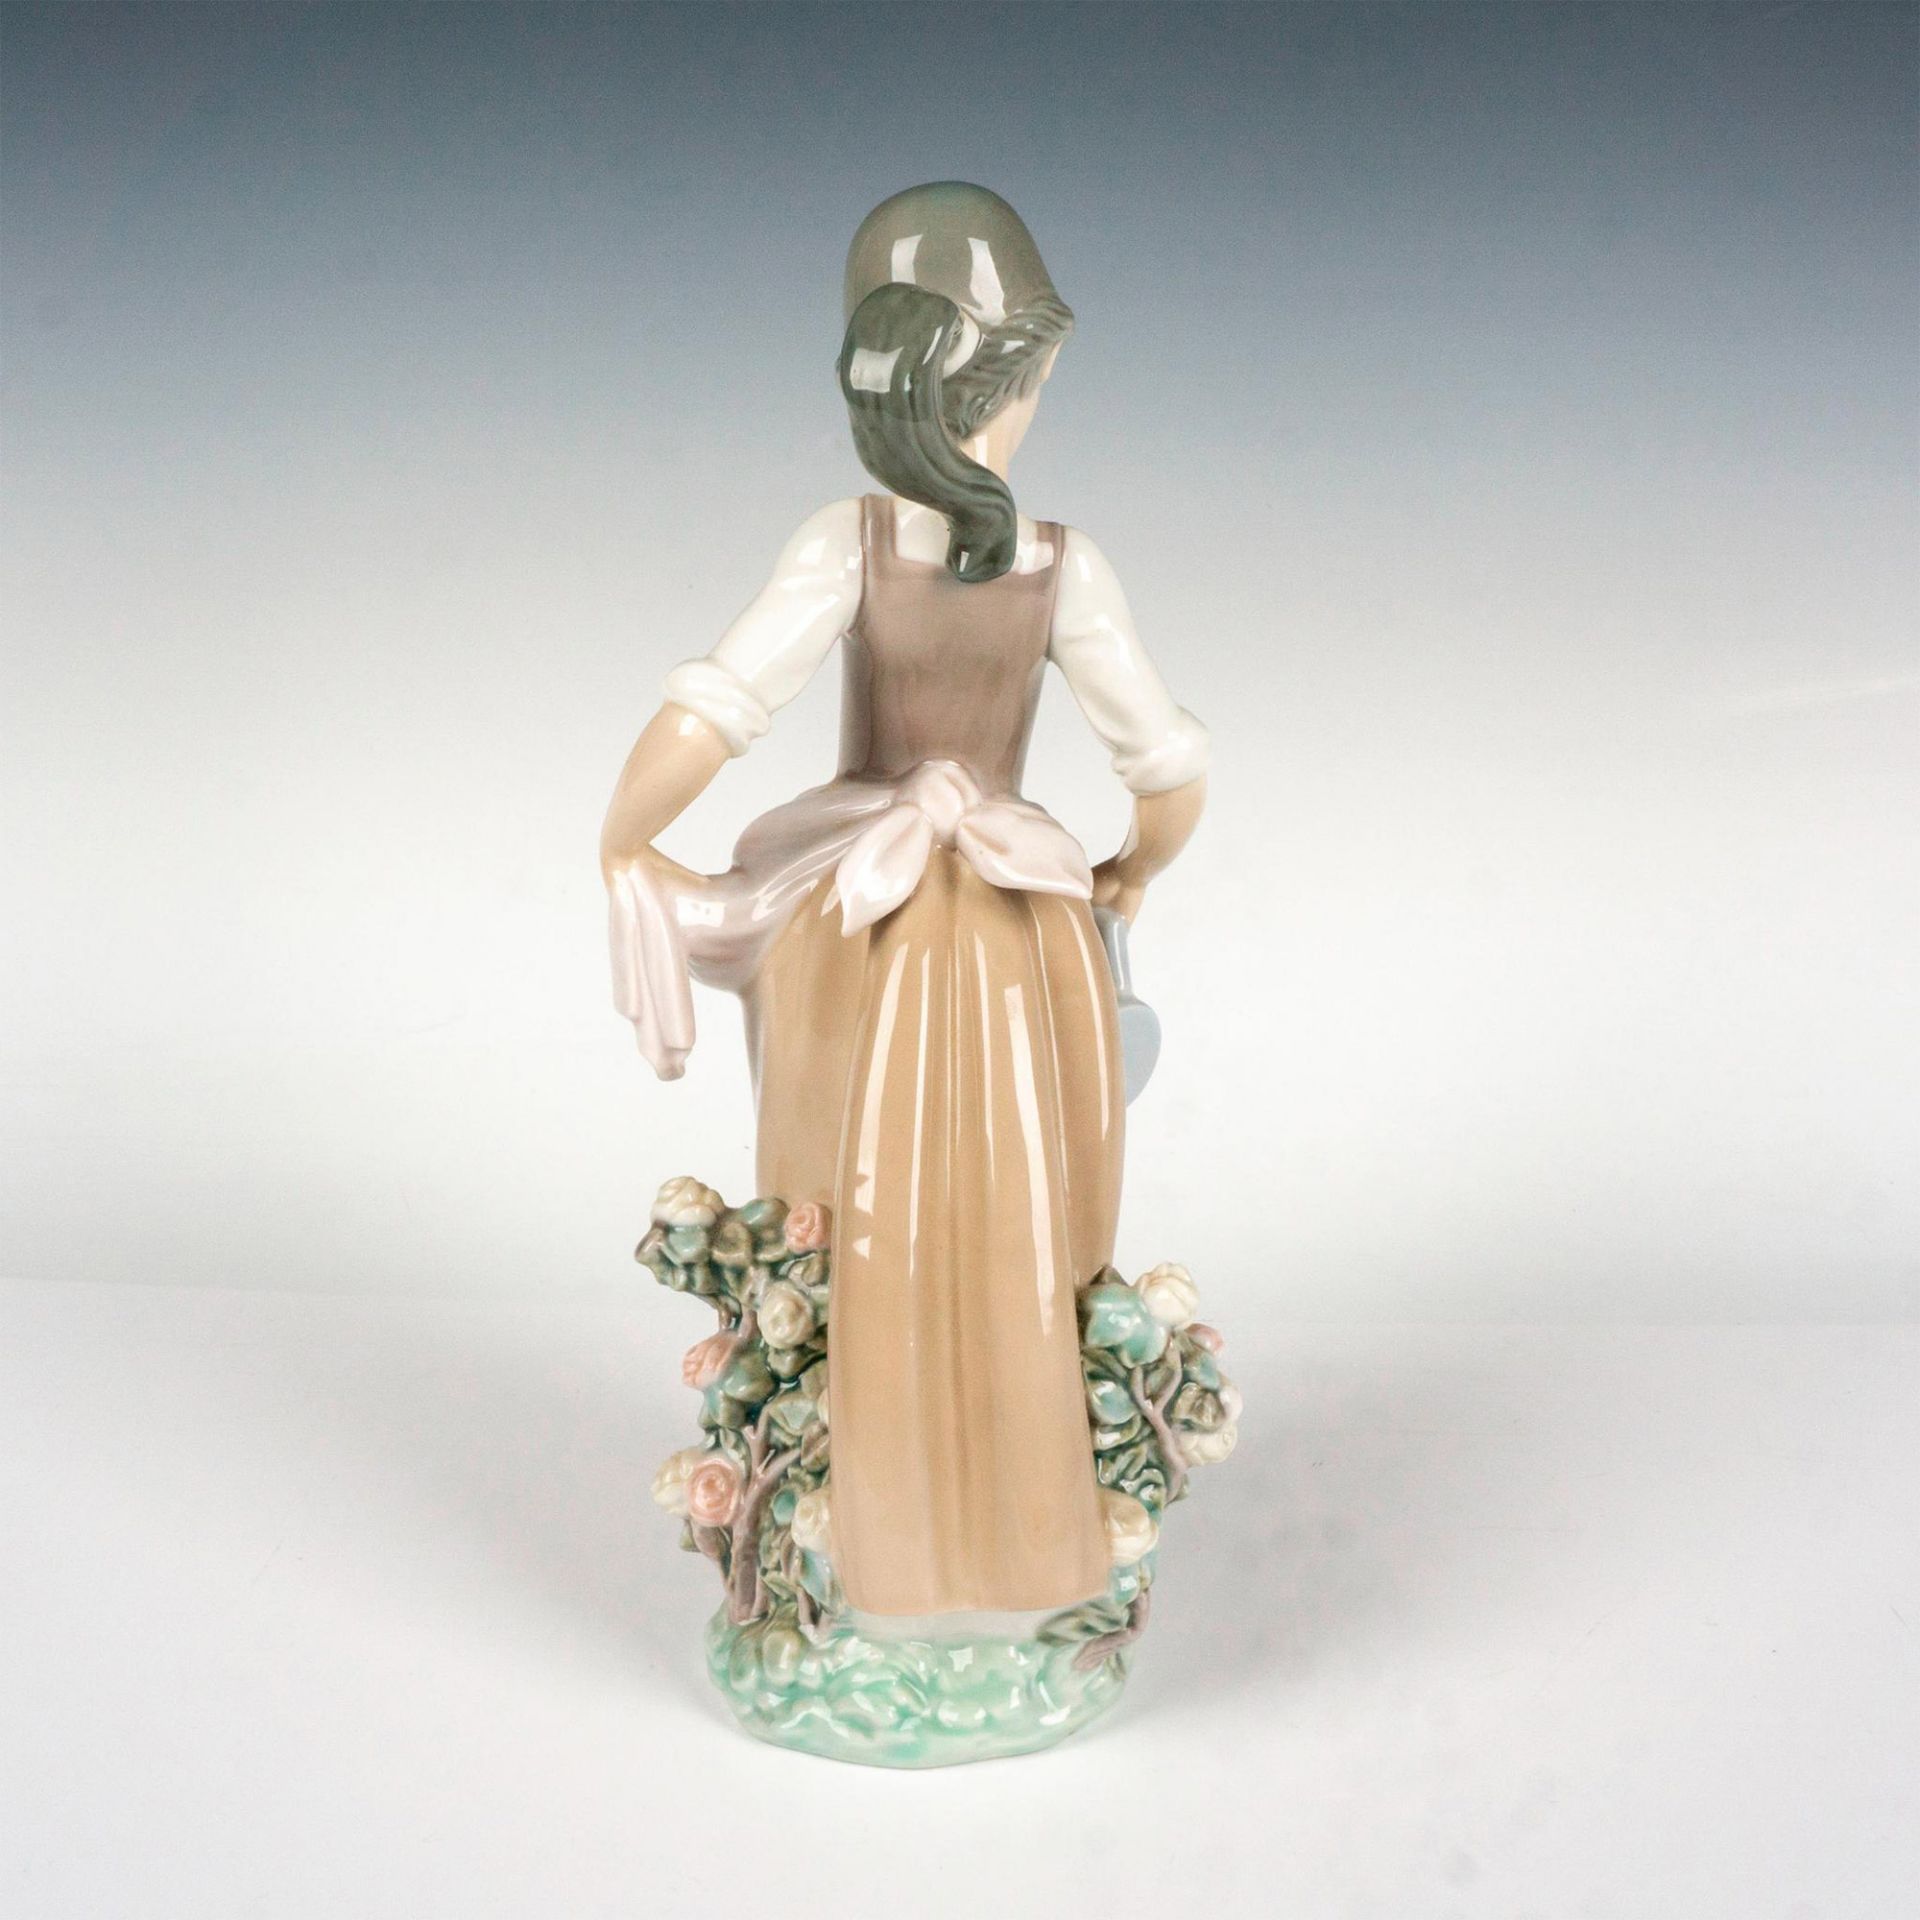 Girl With Watering Can 1001339 - Lladro Porcelain Figurine - Image 2 of 3